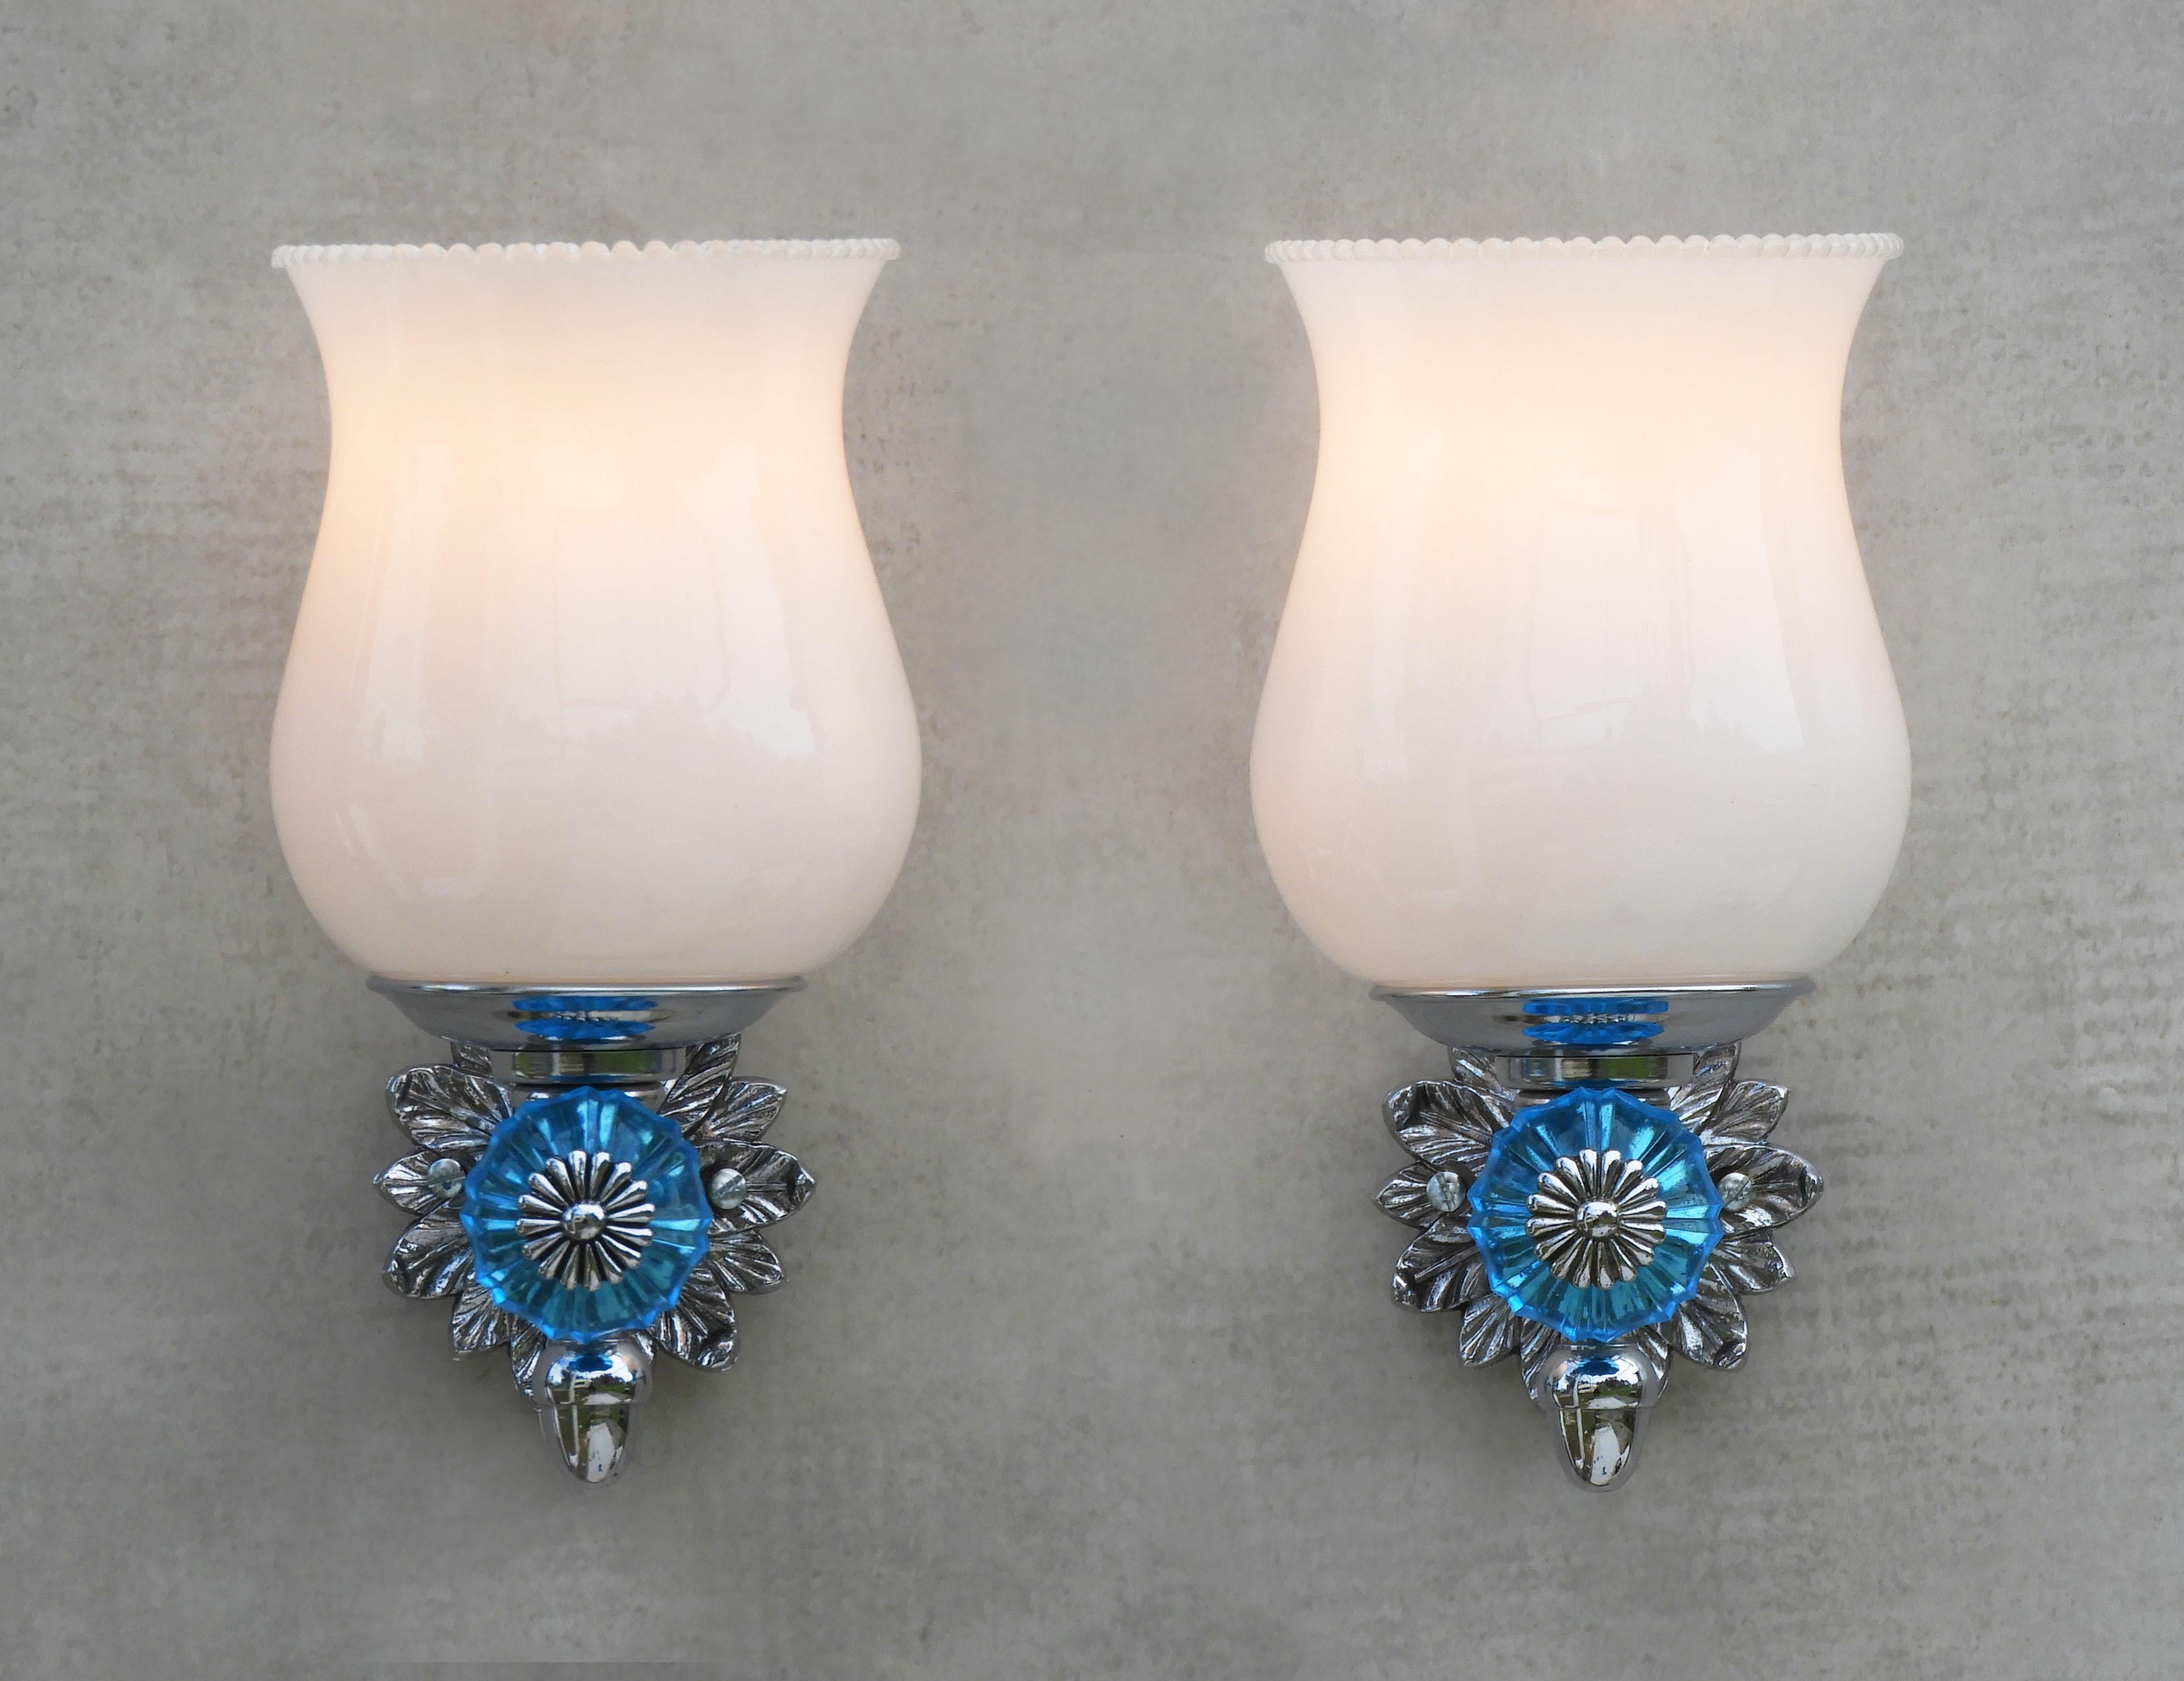 French Blue Glass Flower Wall Light Sconces in Chrome and Opaline C1960s For Sale 1